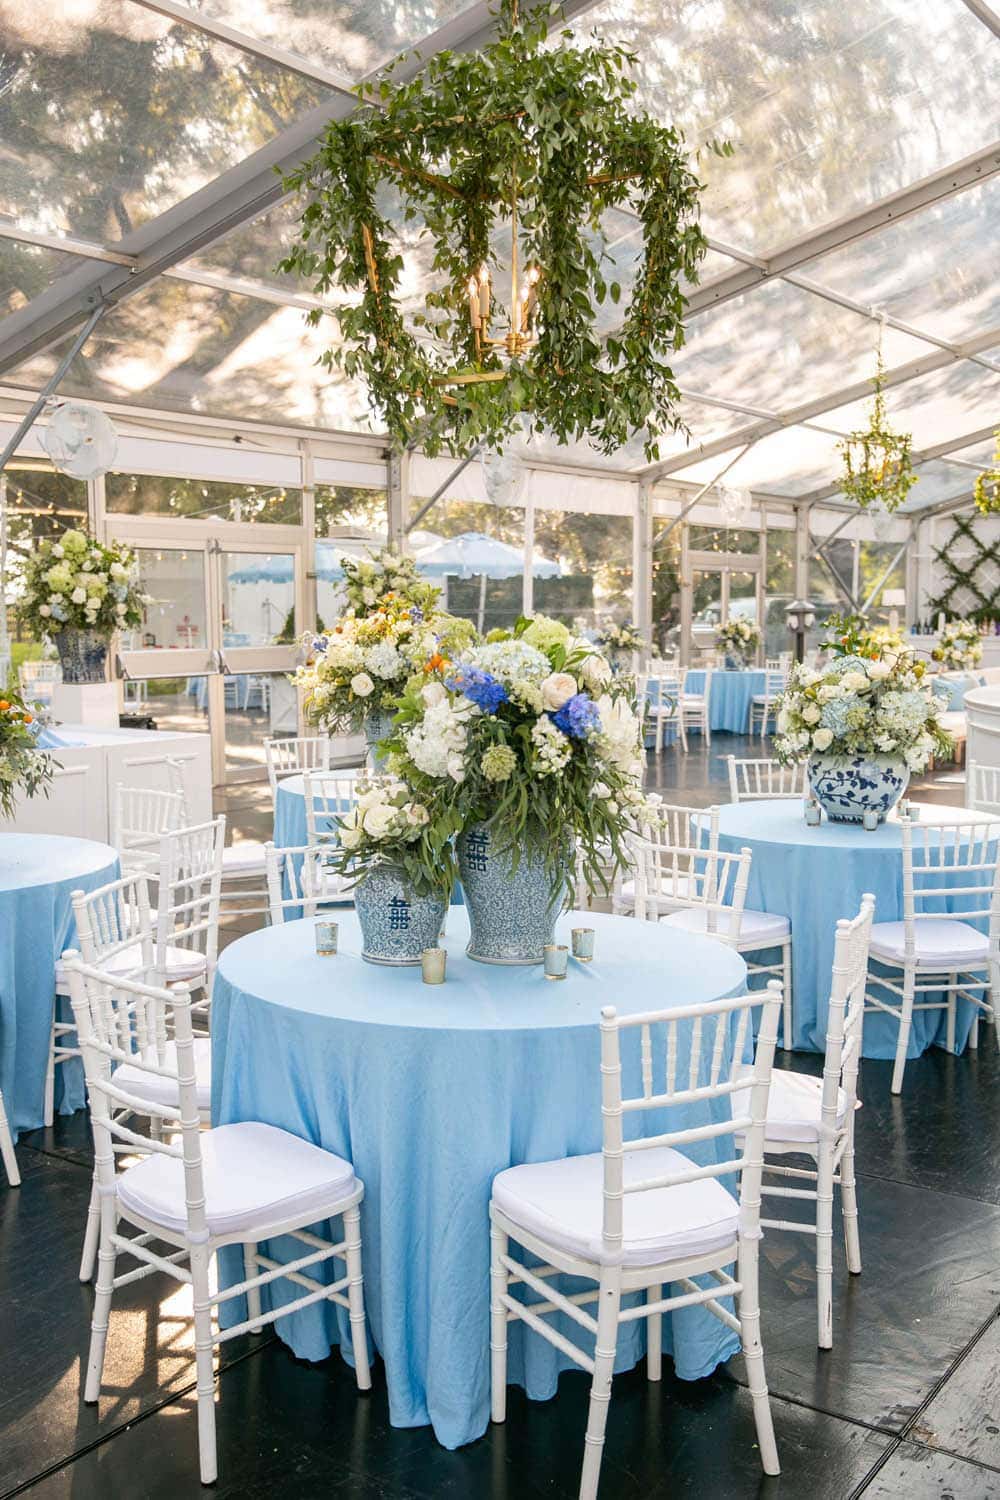 White chairs set with table with blue tablecloth